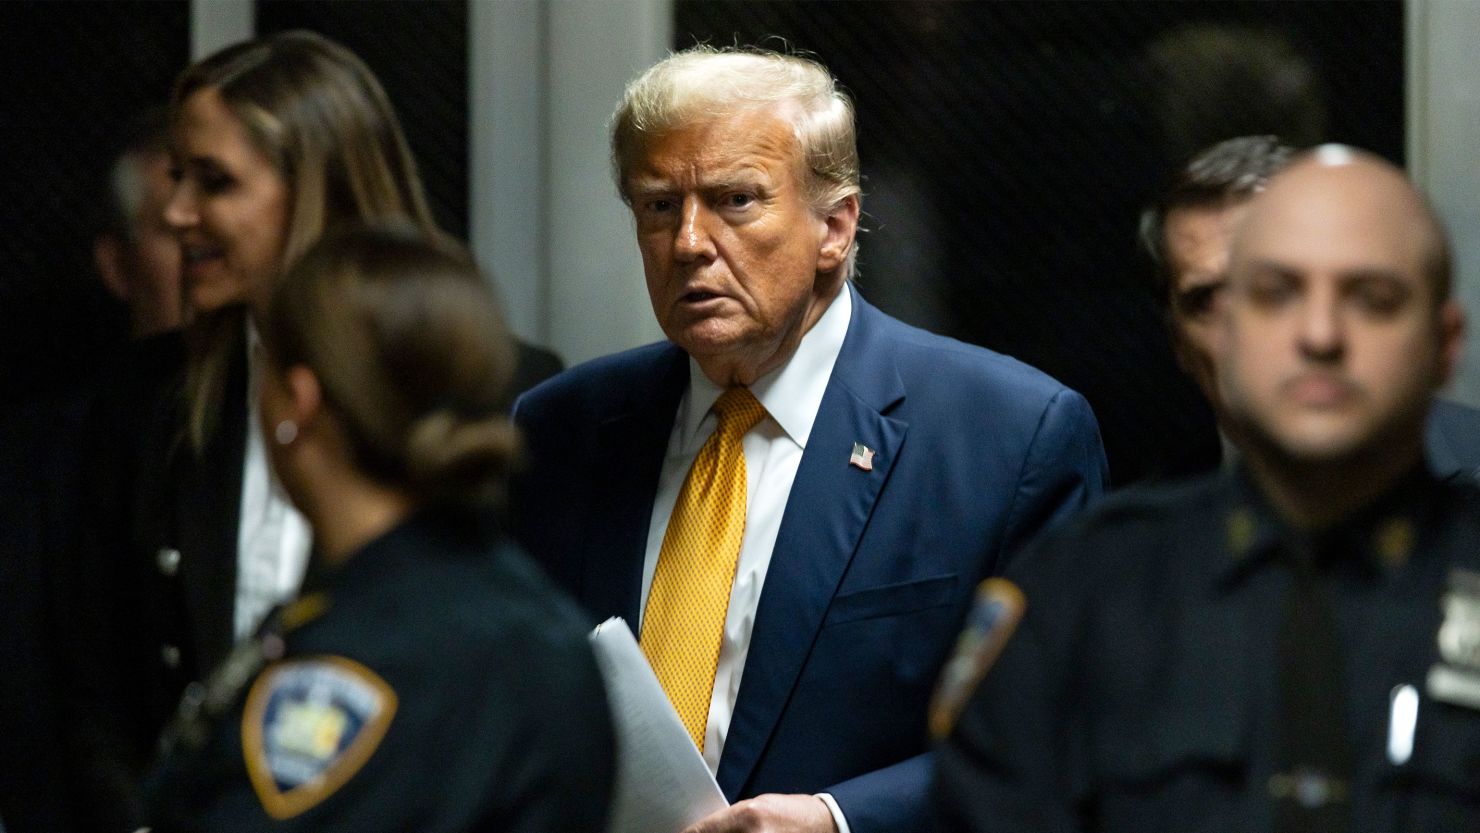 Former President Donald Trump leaves the courtroom at the end of the day's proceedings in his criminal trial for allegedly covering up hush money payments at Manhattan Criminal Court on May 14, 2024 in New York City.